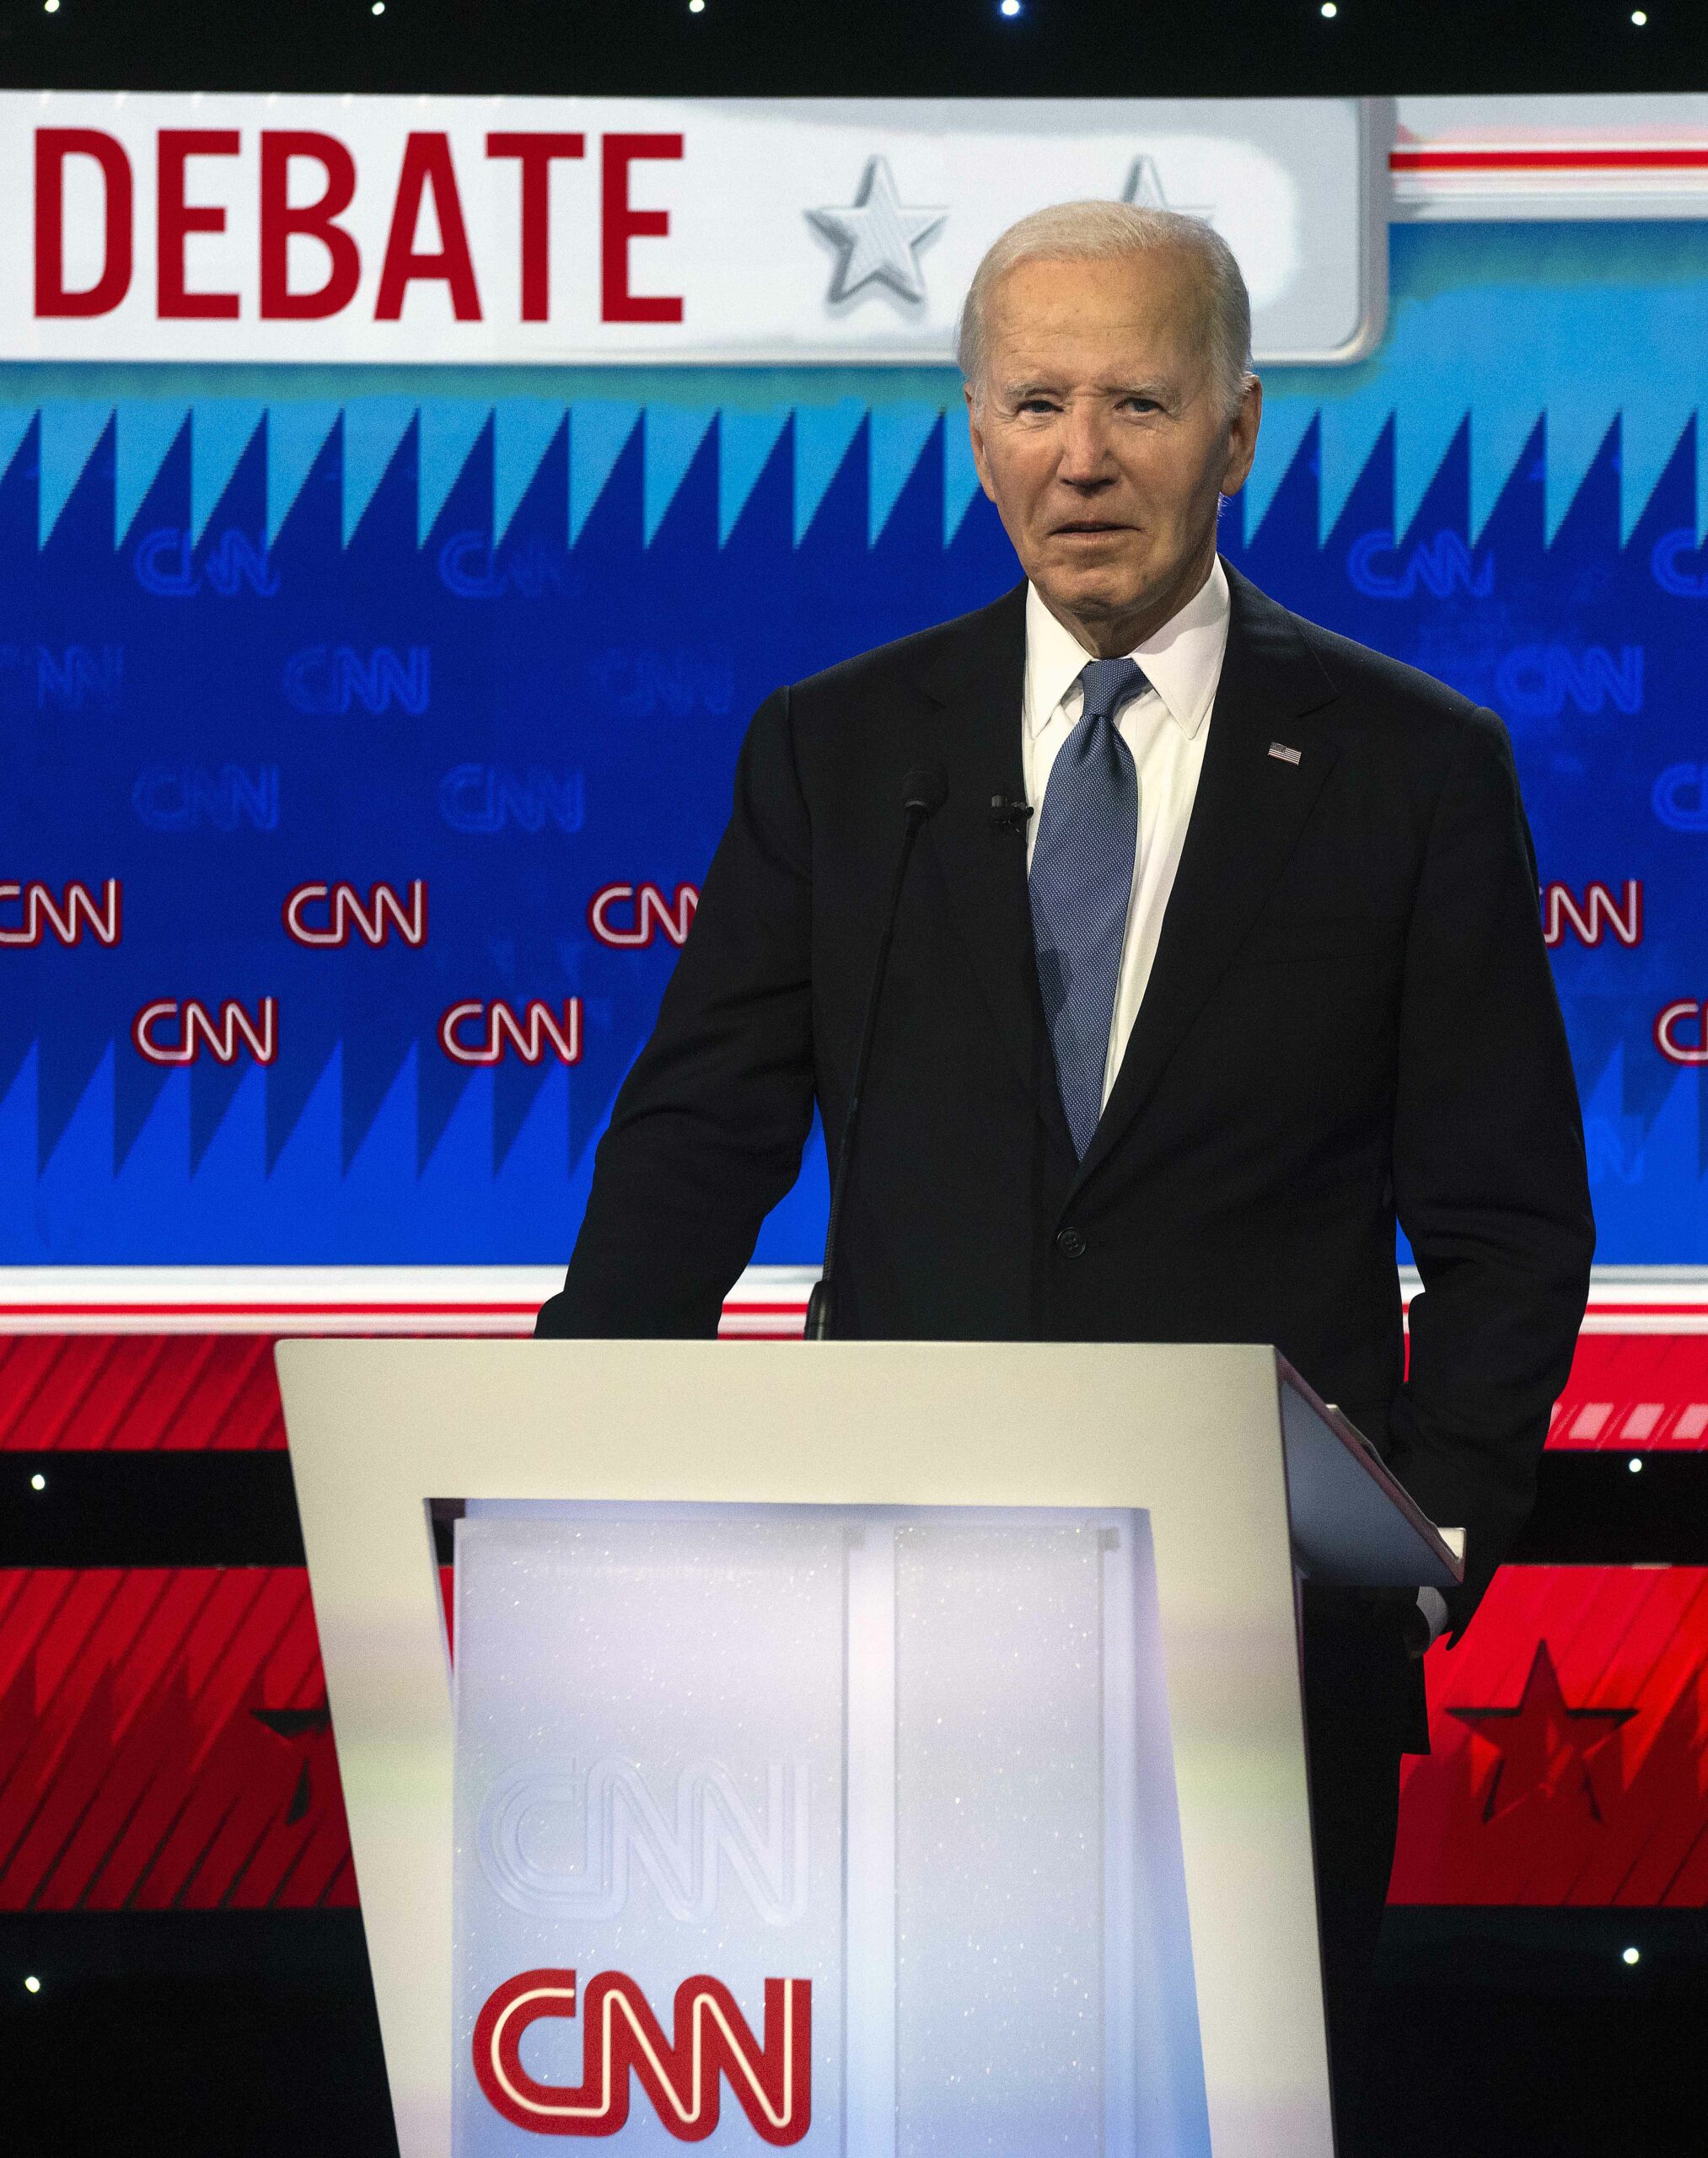 Biden is a very good president, but it’s time for him to step aside as candidate